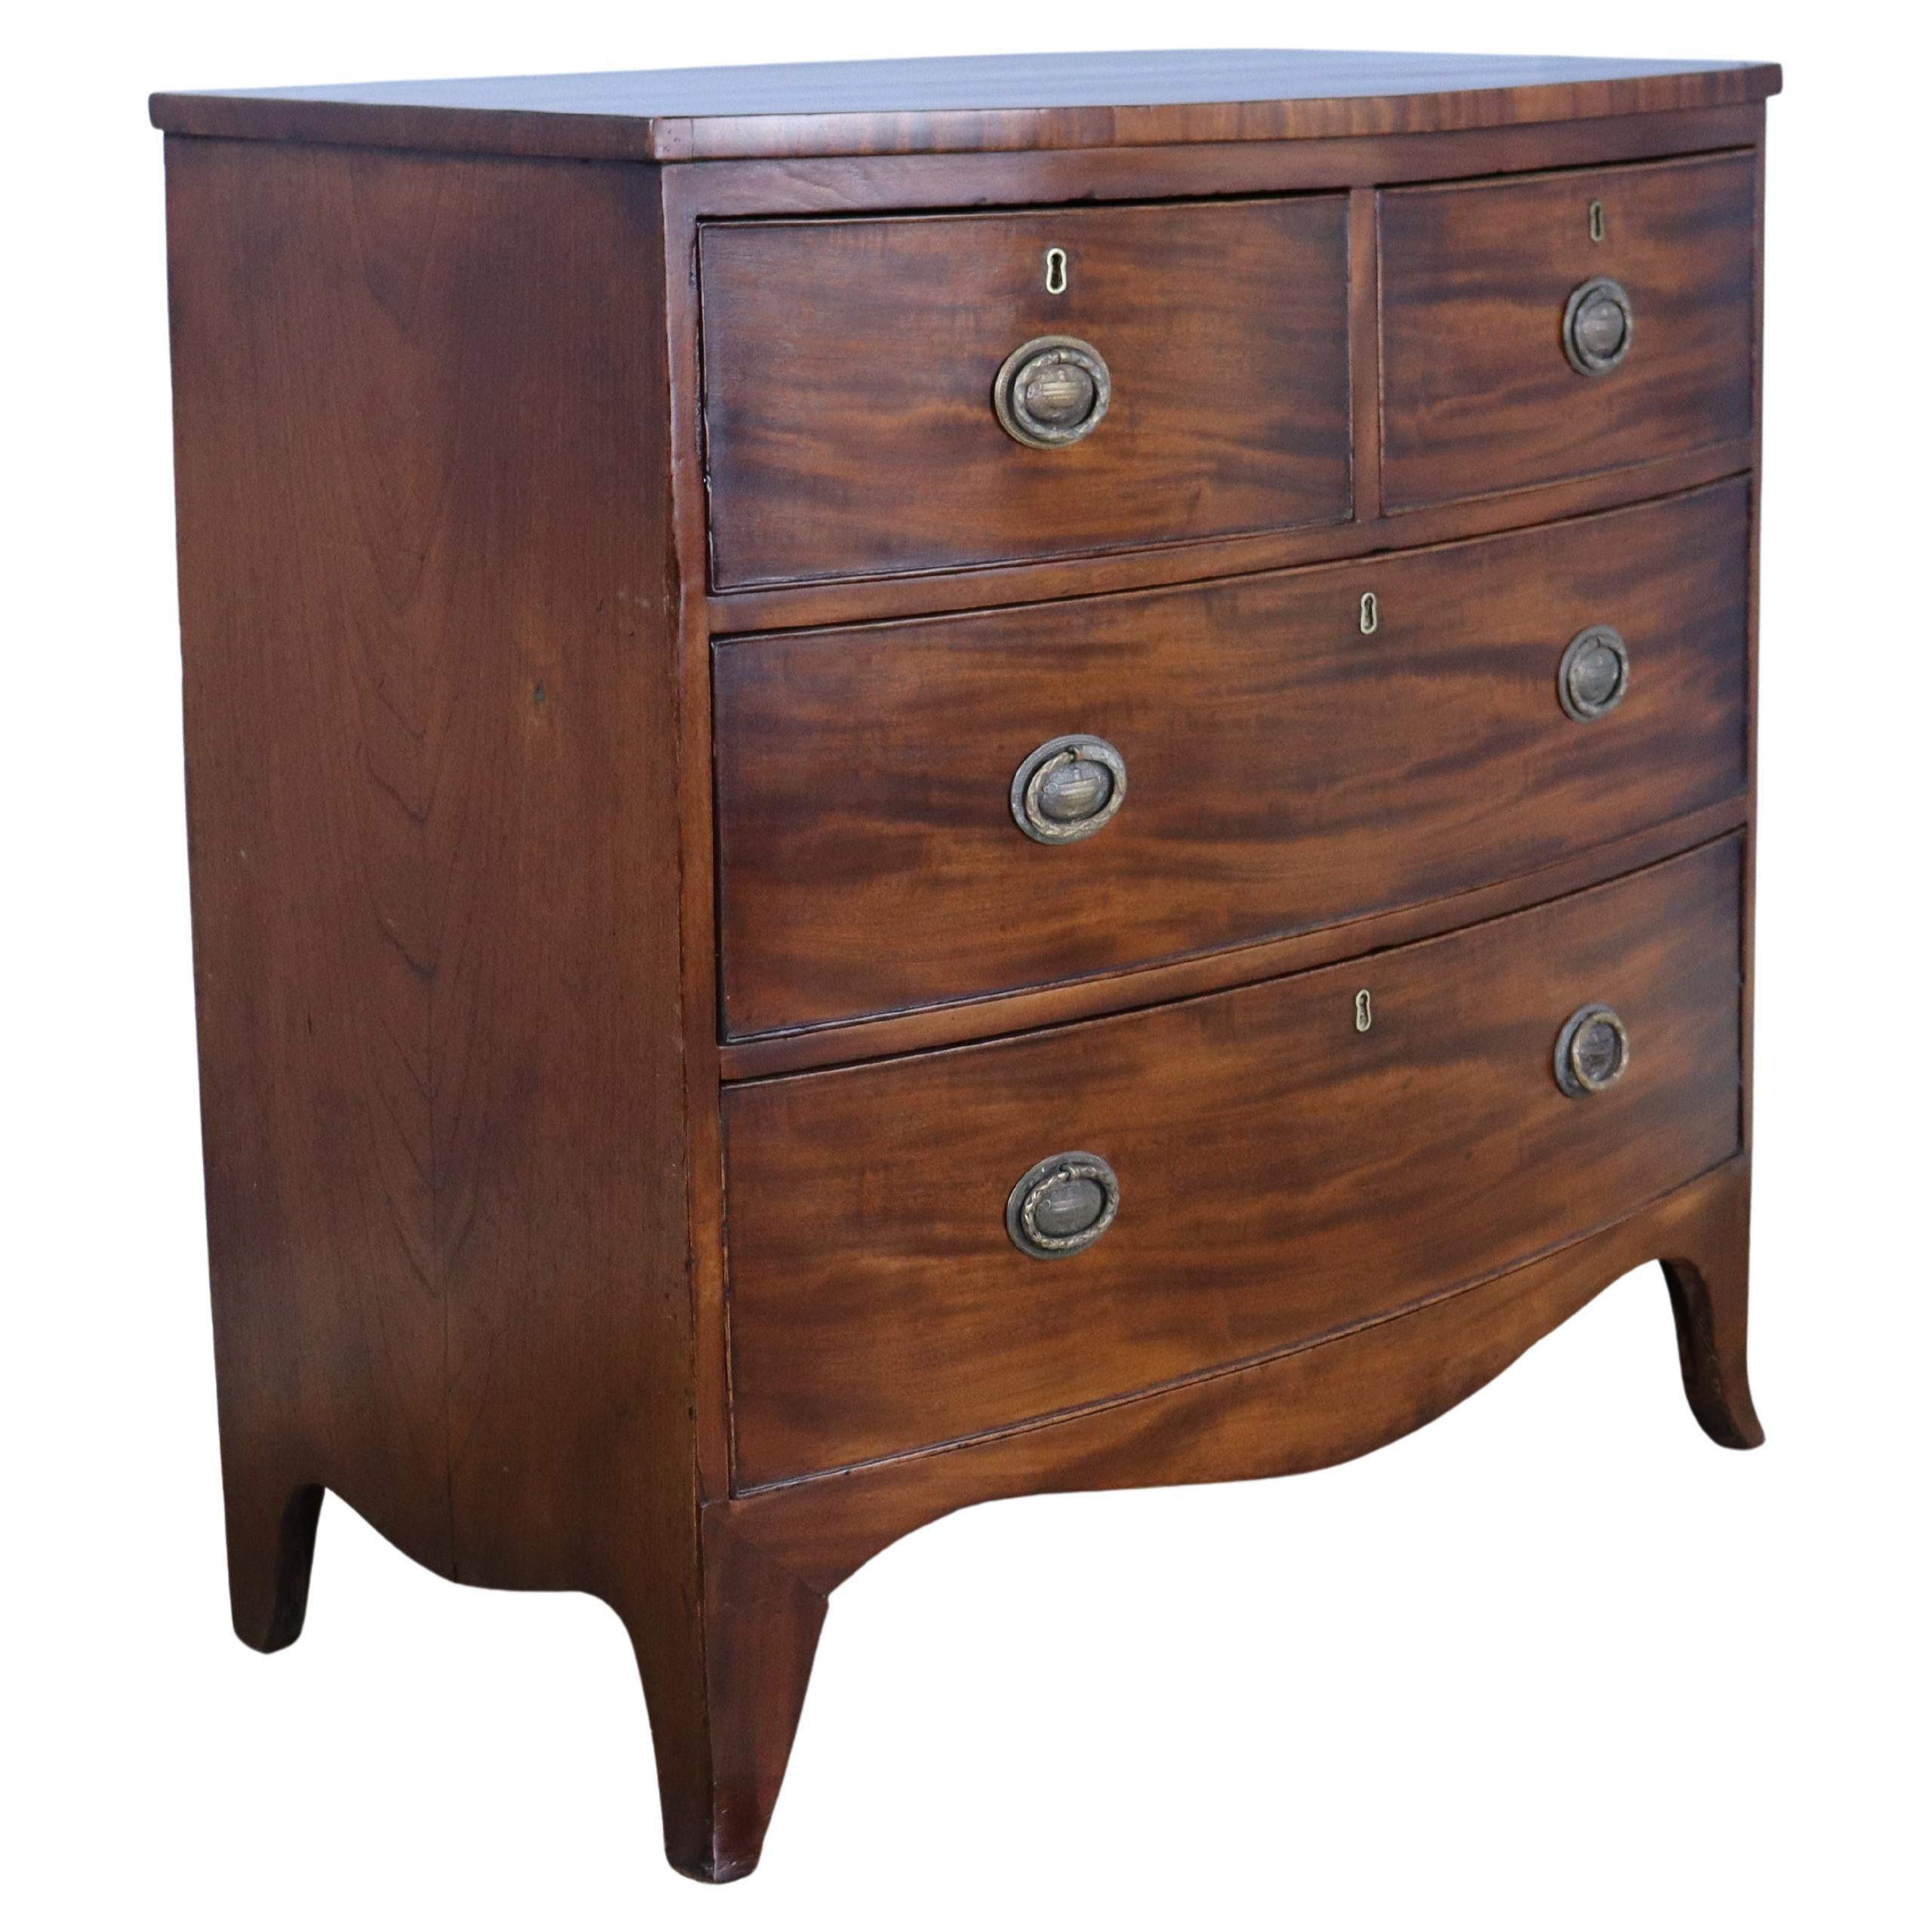 Antique Mahogany Bowfront Chest of Drawers